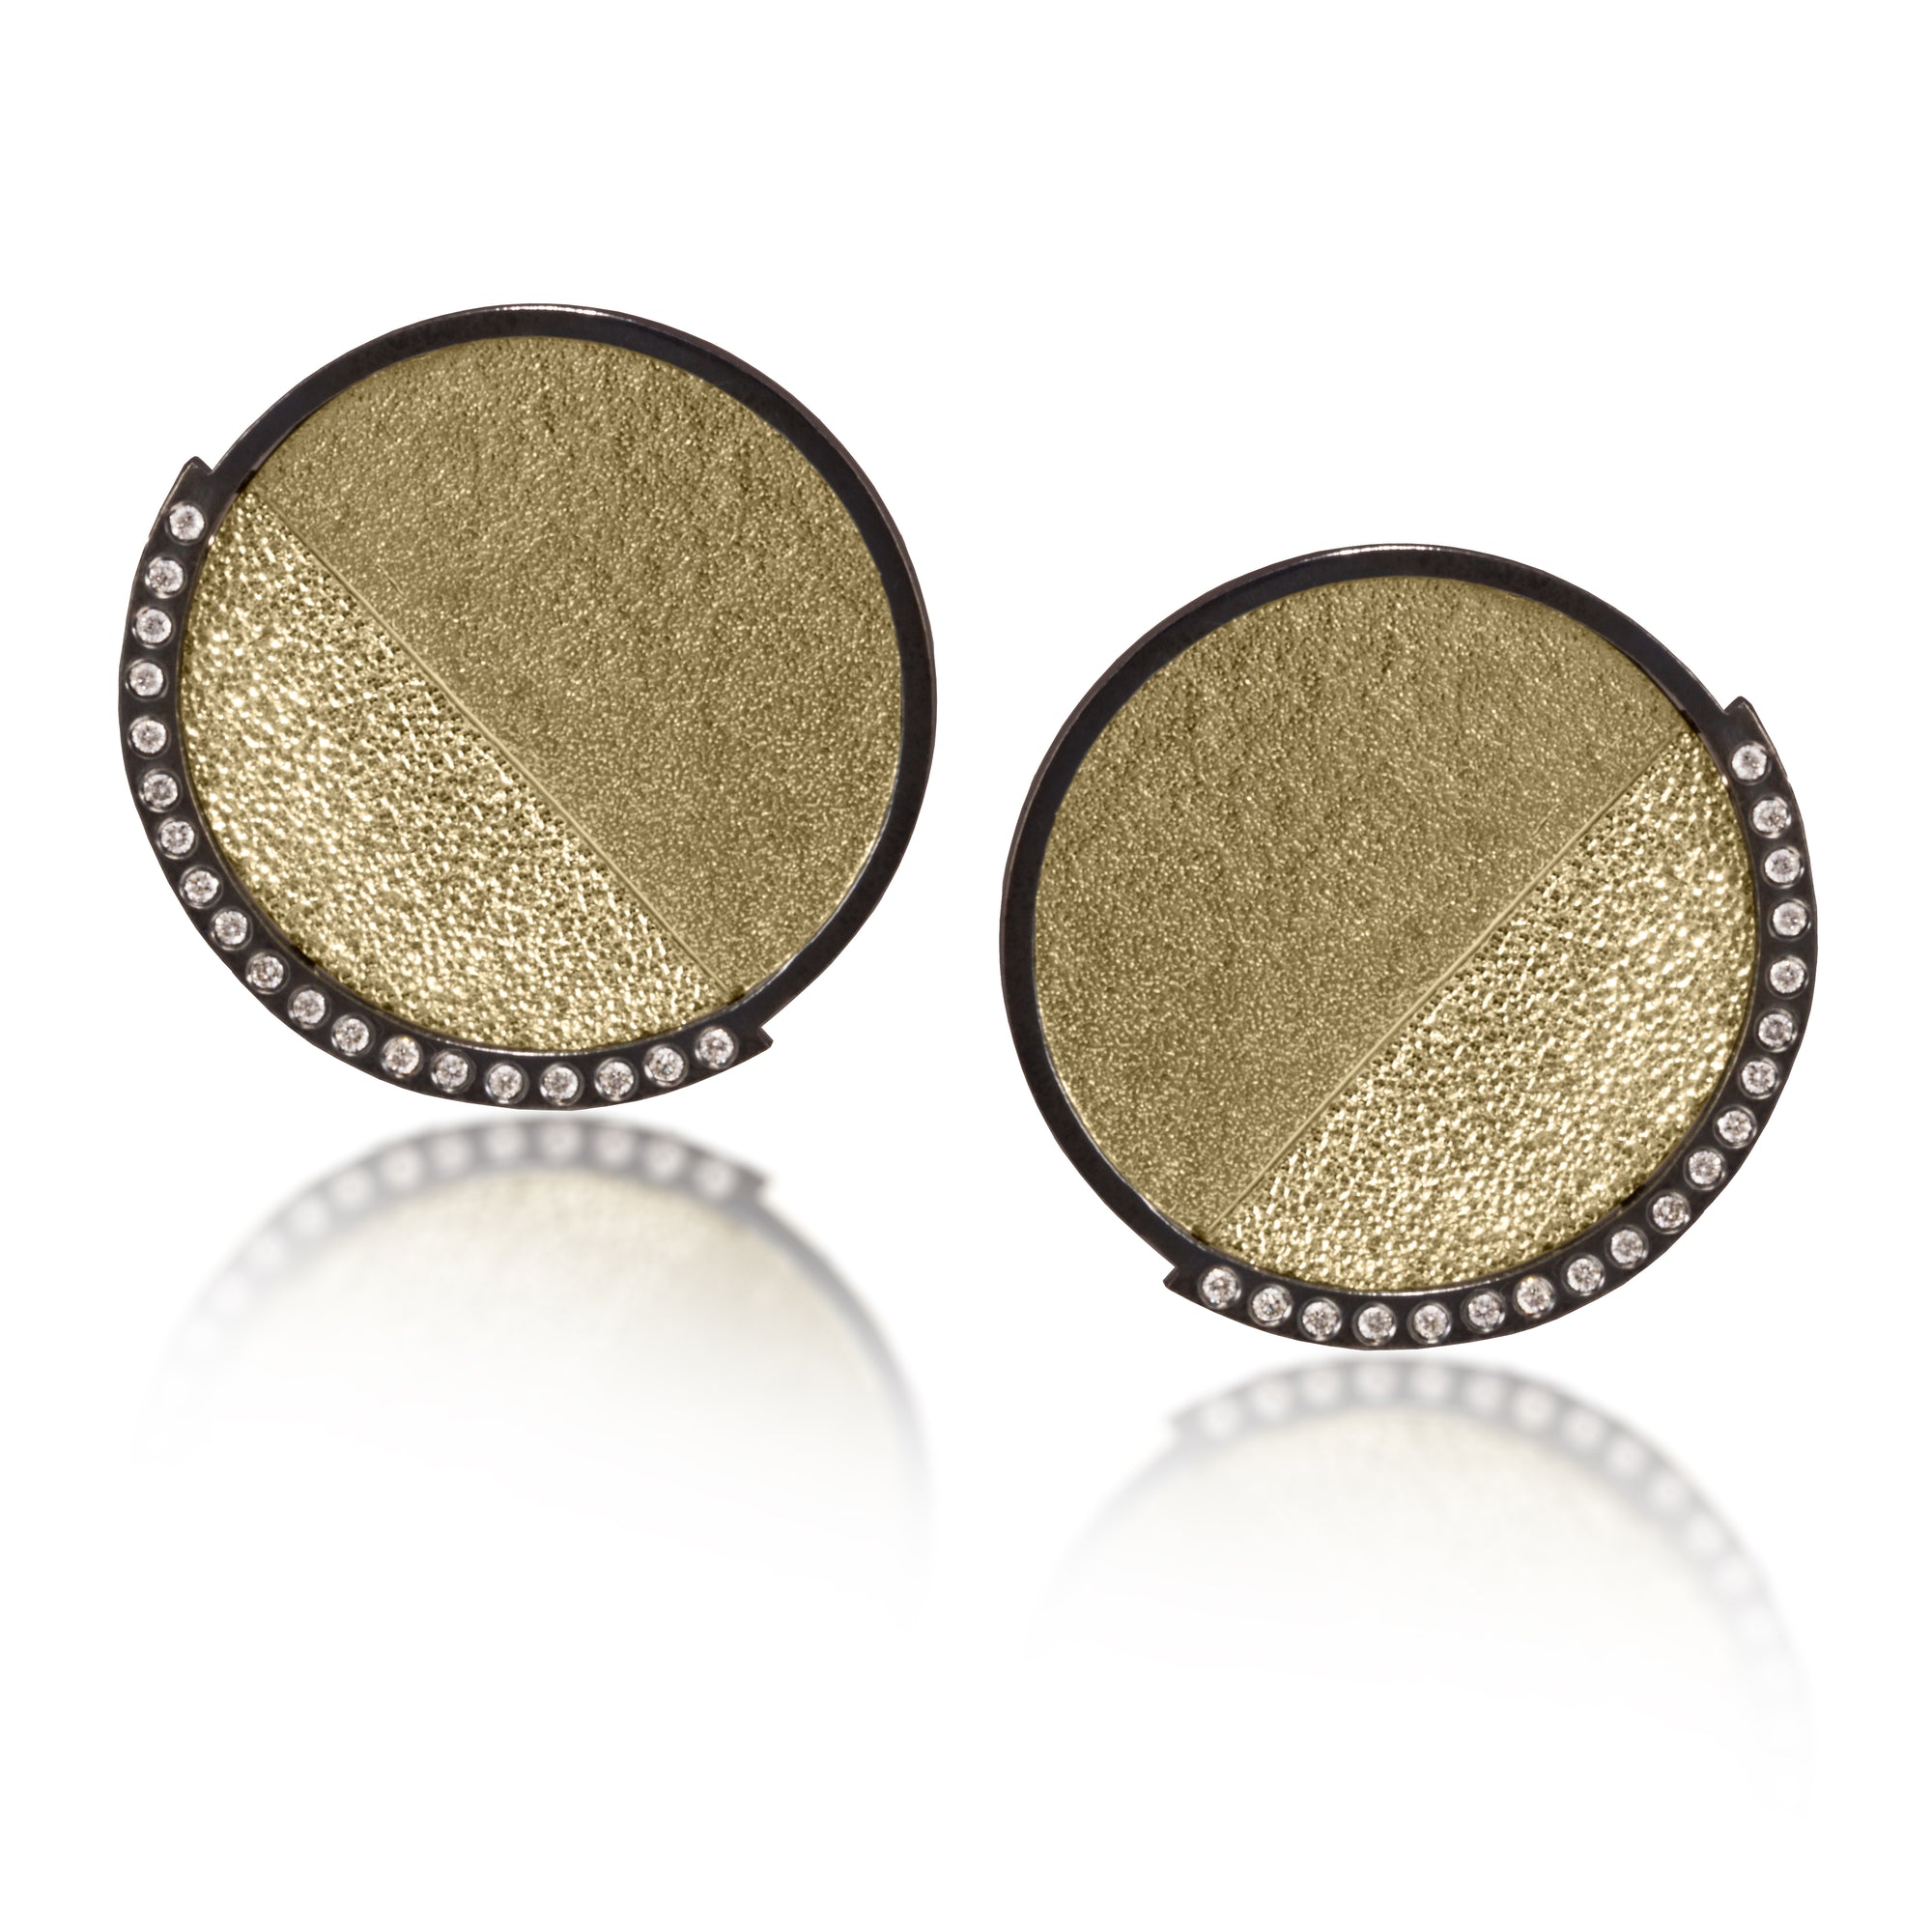 This post earring in oxidized sterling silver and richly textured 18k bimetal, is flush set with ideal cut white diamonds. It features 14k gold posts. Accent facet glitters with the texture of diamond facets, individually scored and textured.  Medium size 0.069 tcw, small size 0.1518 tcw.